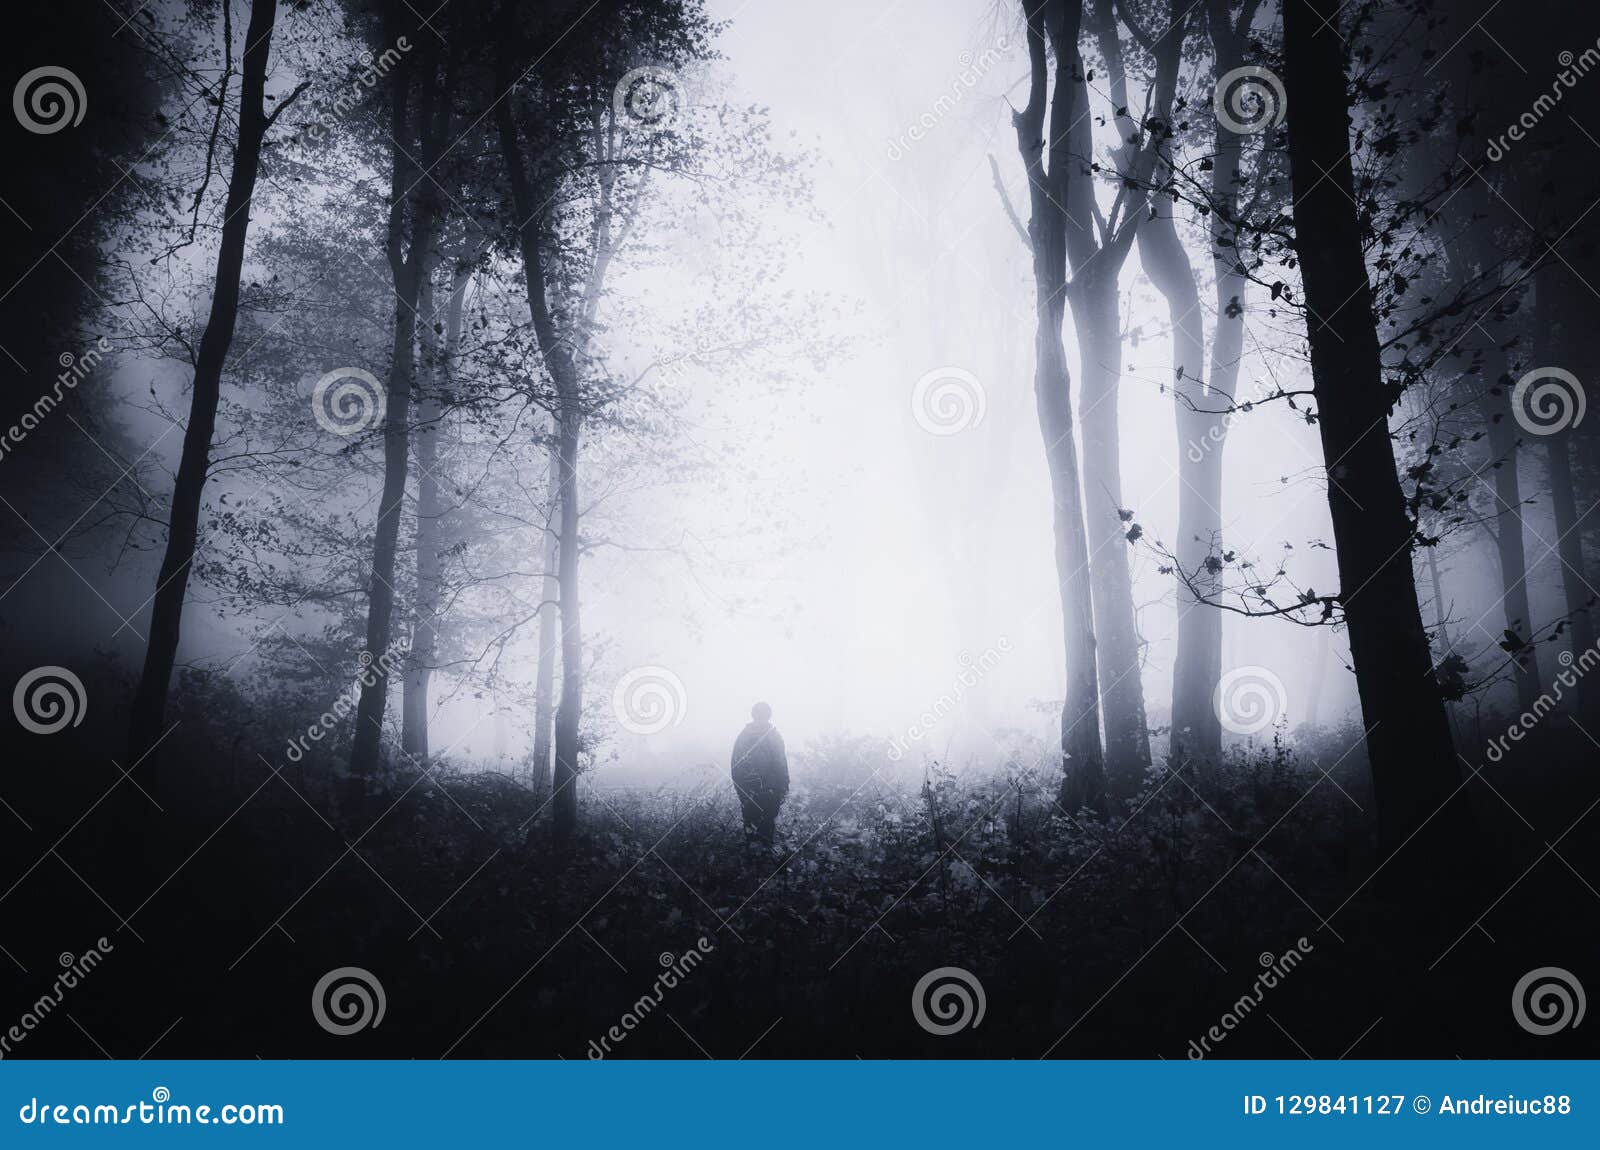 Man Silhouette In Scary Dark Haunted Forest With Fog Stock Image Image Of Landscape Black